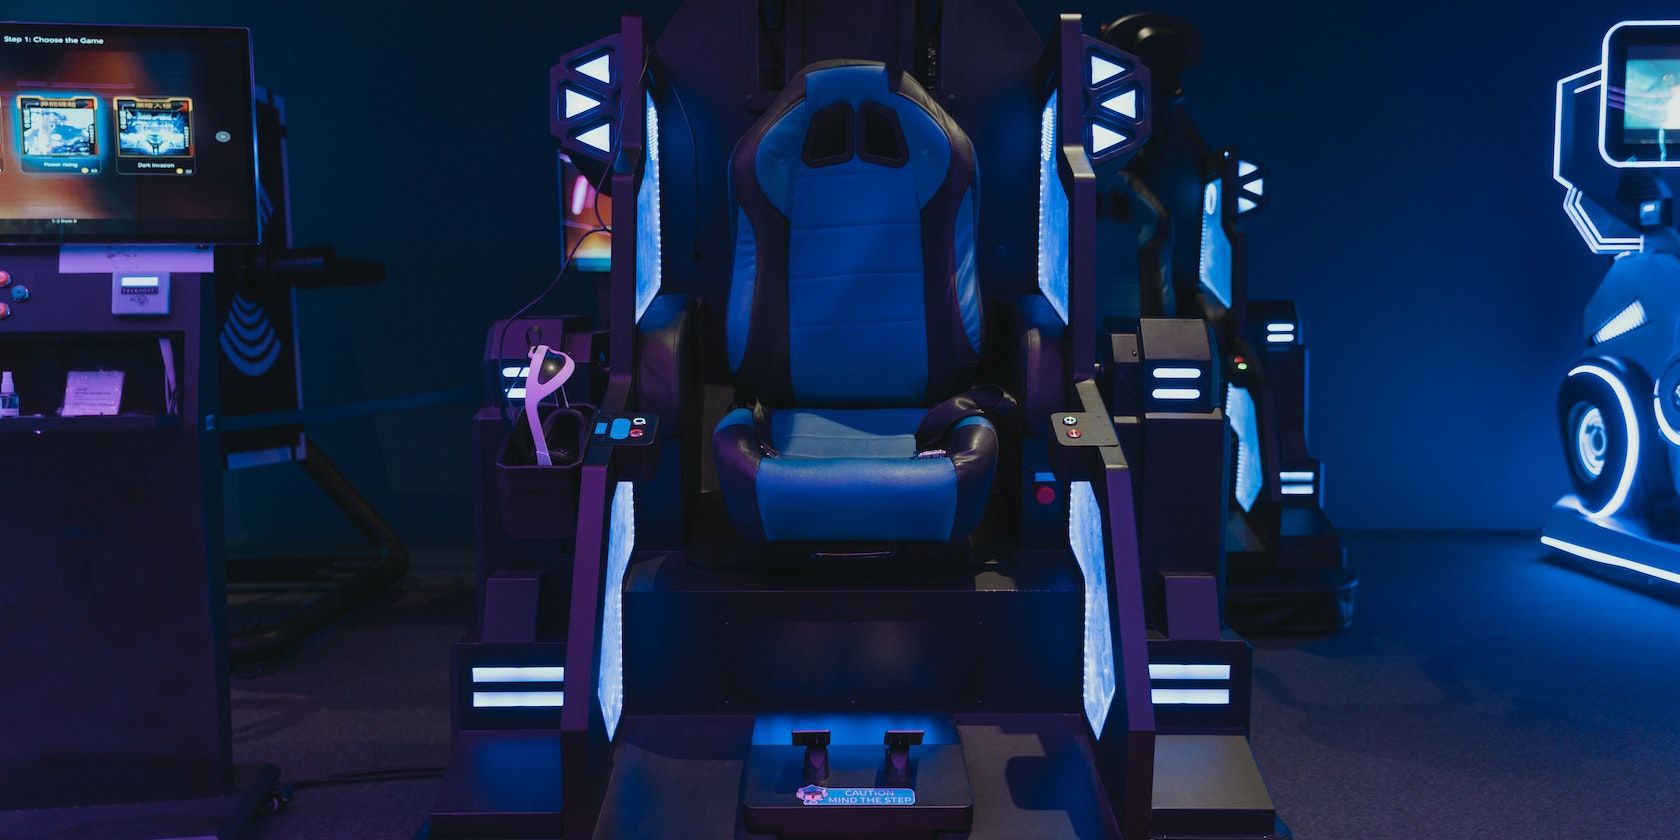 Gaming chair in an arcade